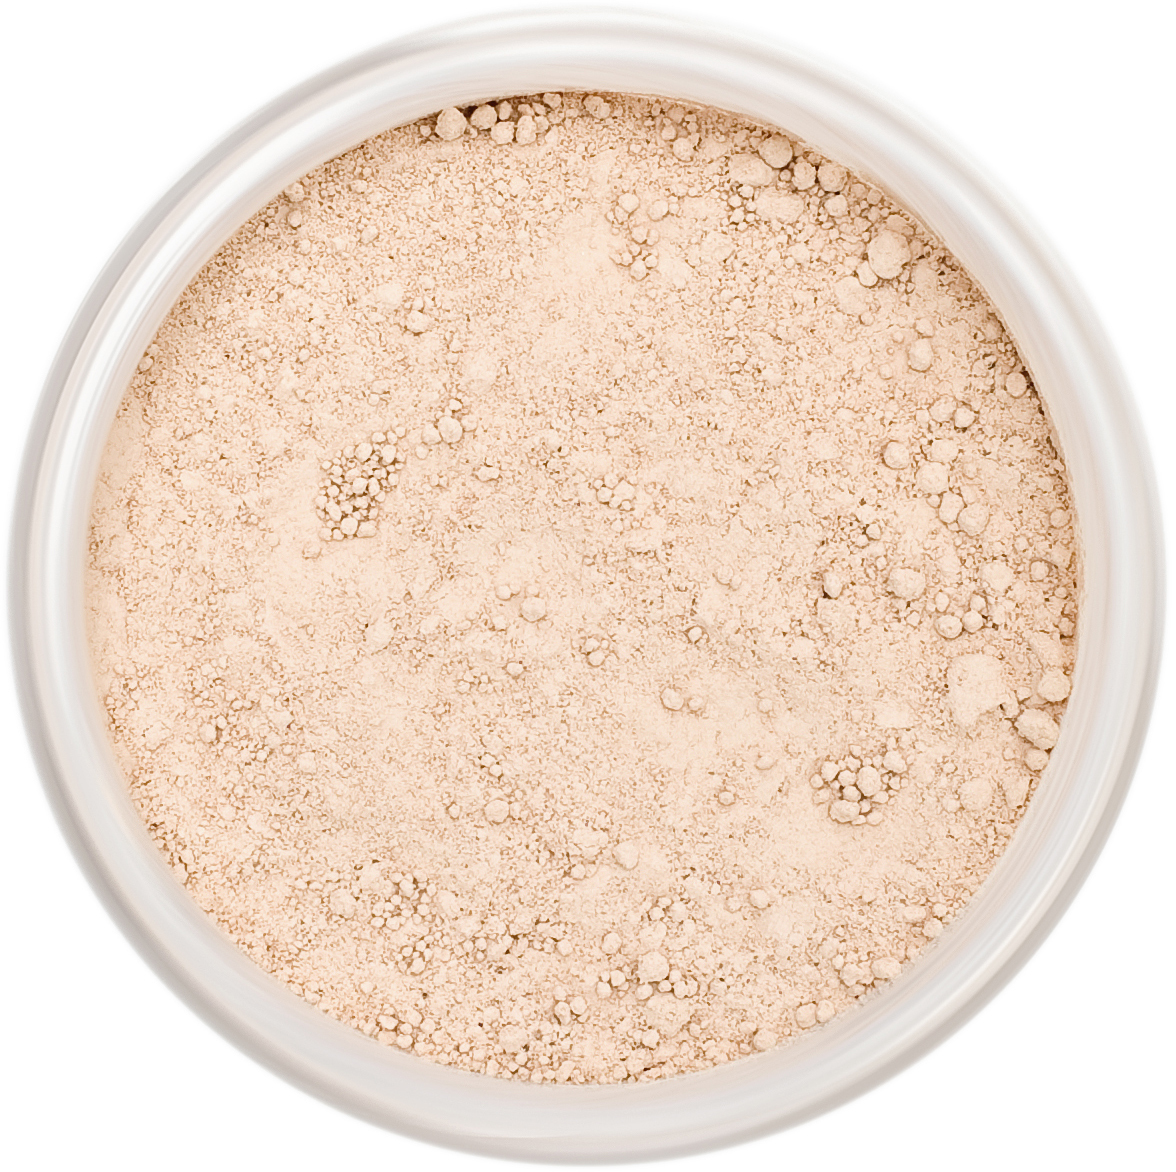 Lily Lolo Mineral Foundation SPF 15 Blondie